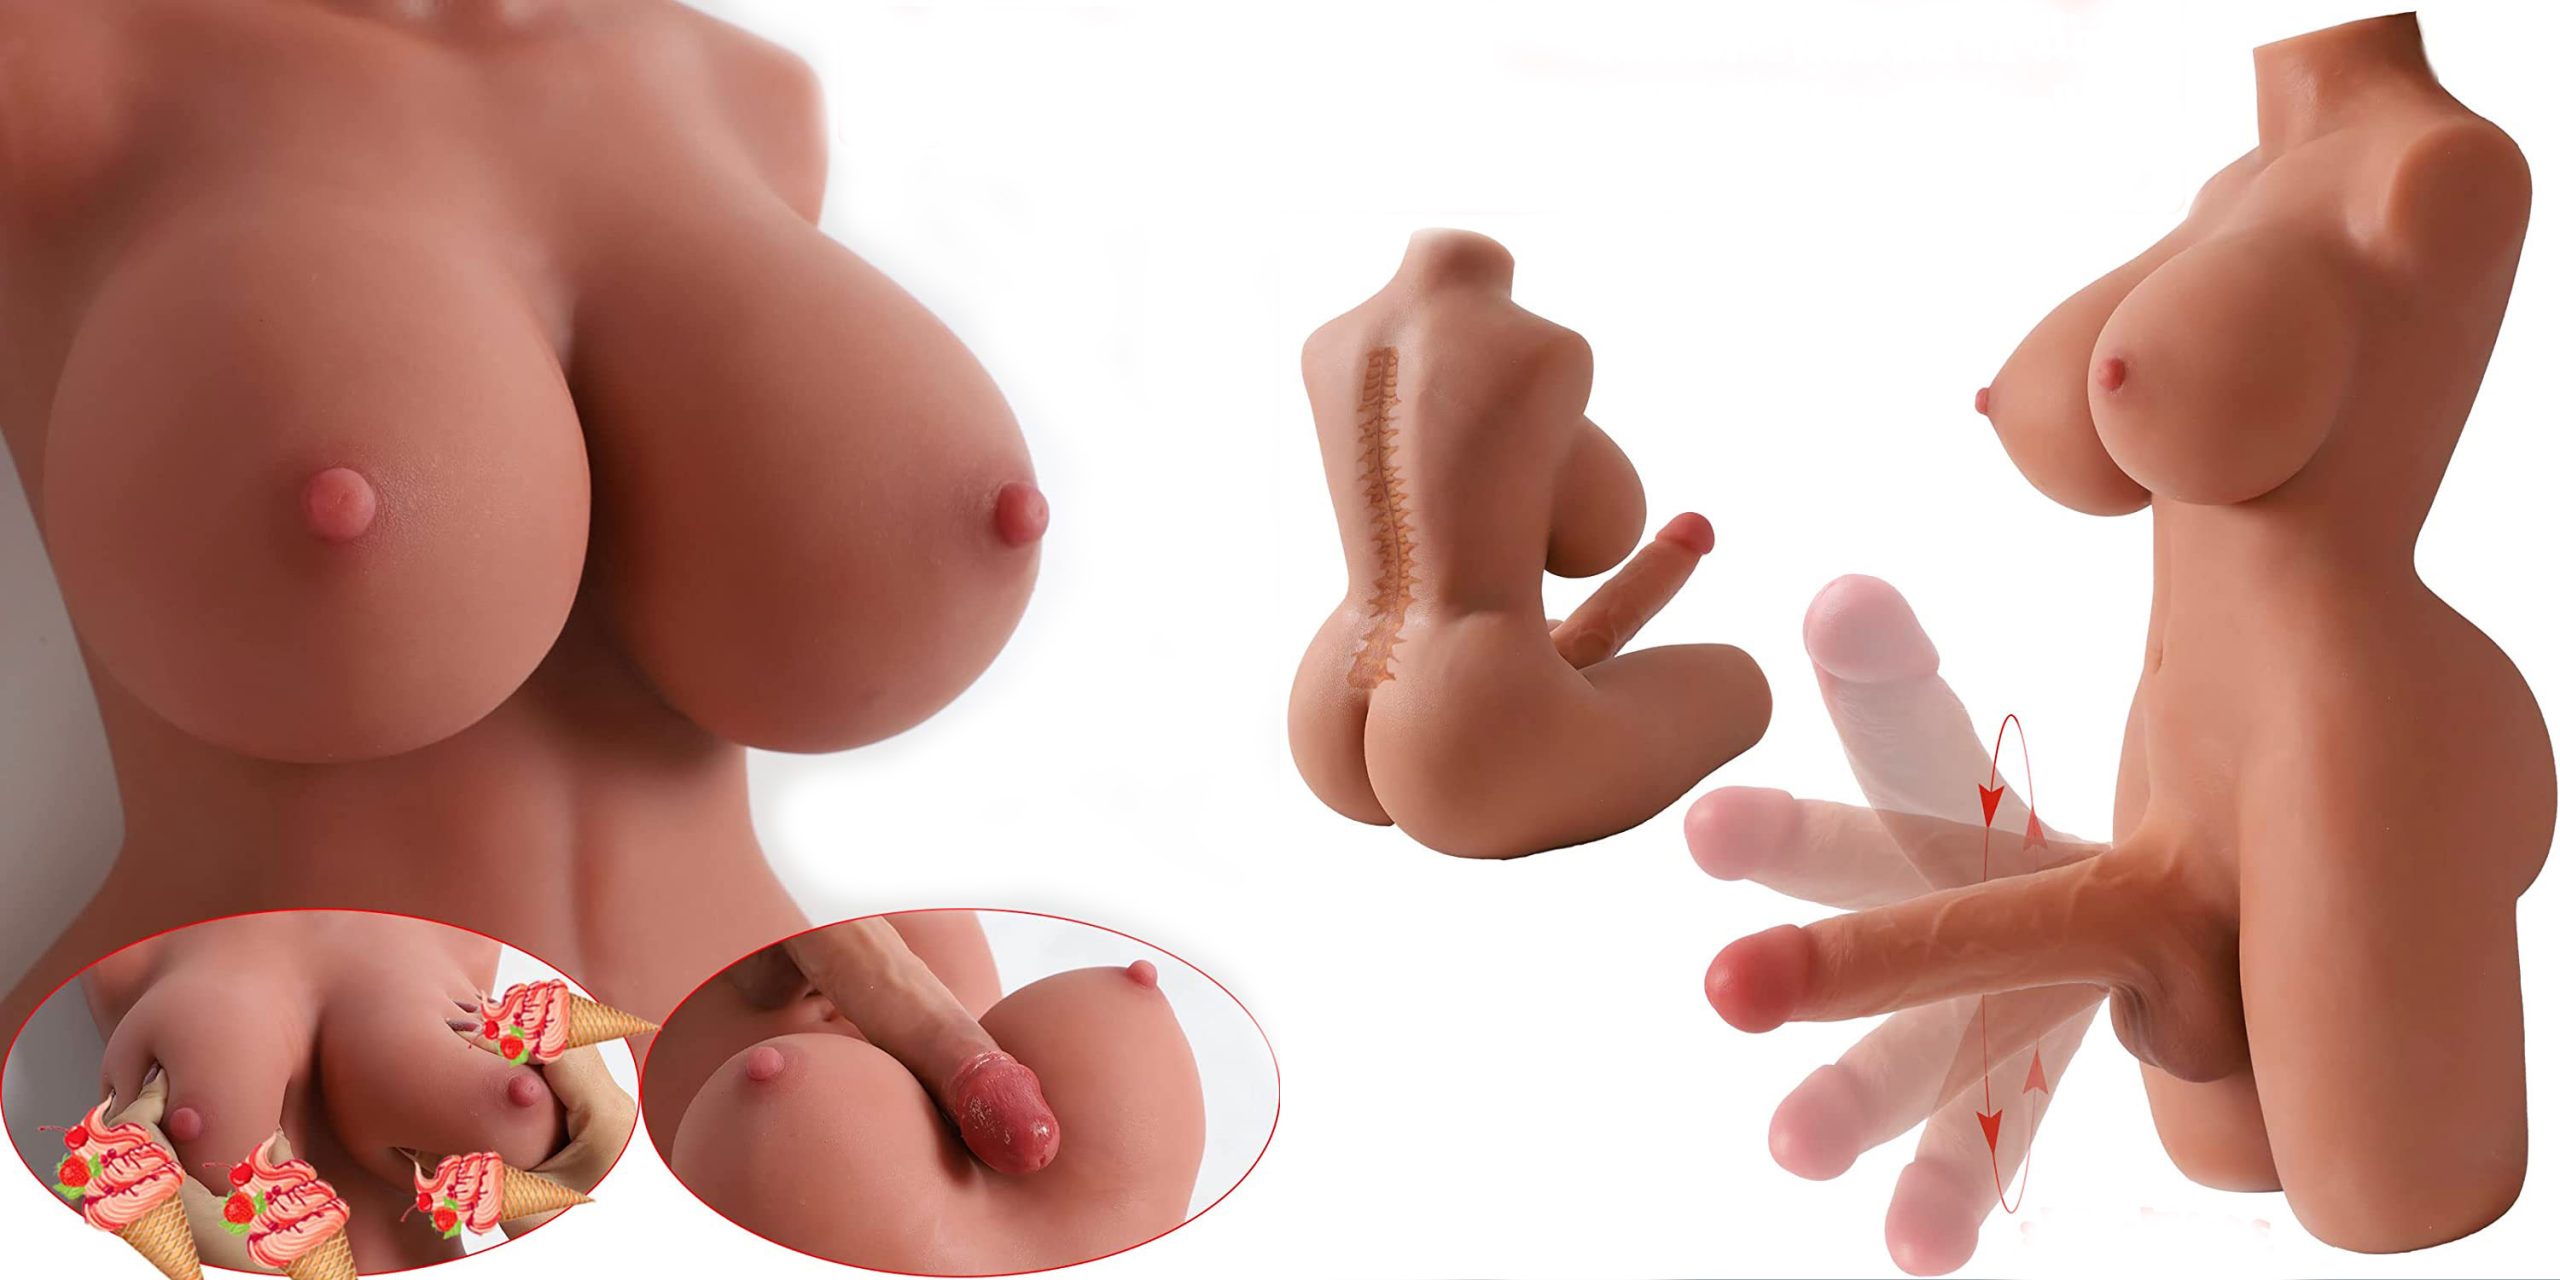 Hugh Penis Silicone Breast Anal Testicles Unisex Masturbator for Men Women Gay Couple Adult Sex Toy Brown 20lb Shemale Sex Doll Torso Lifelike Transsexual